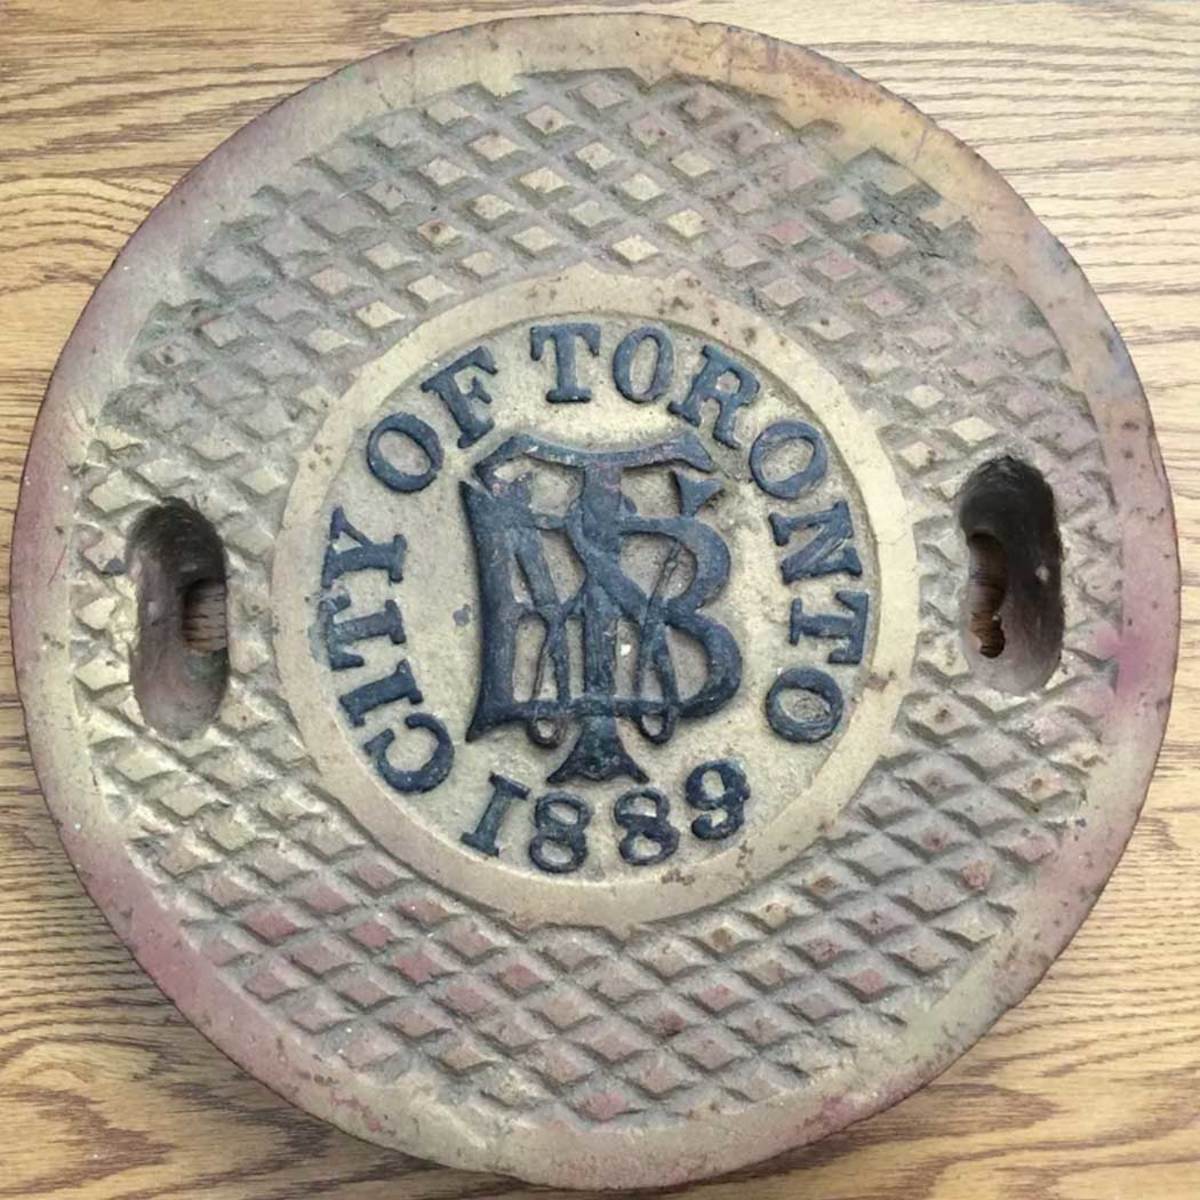 Toronto antique manhole cover from 1889; $1,644 on Etsy.